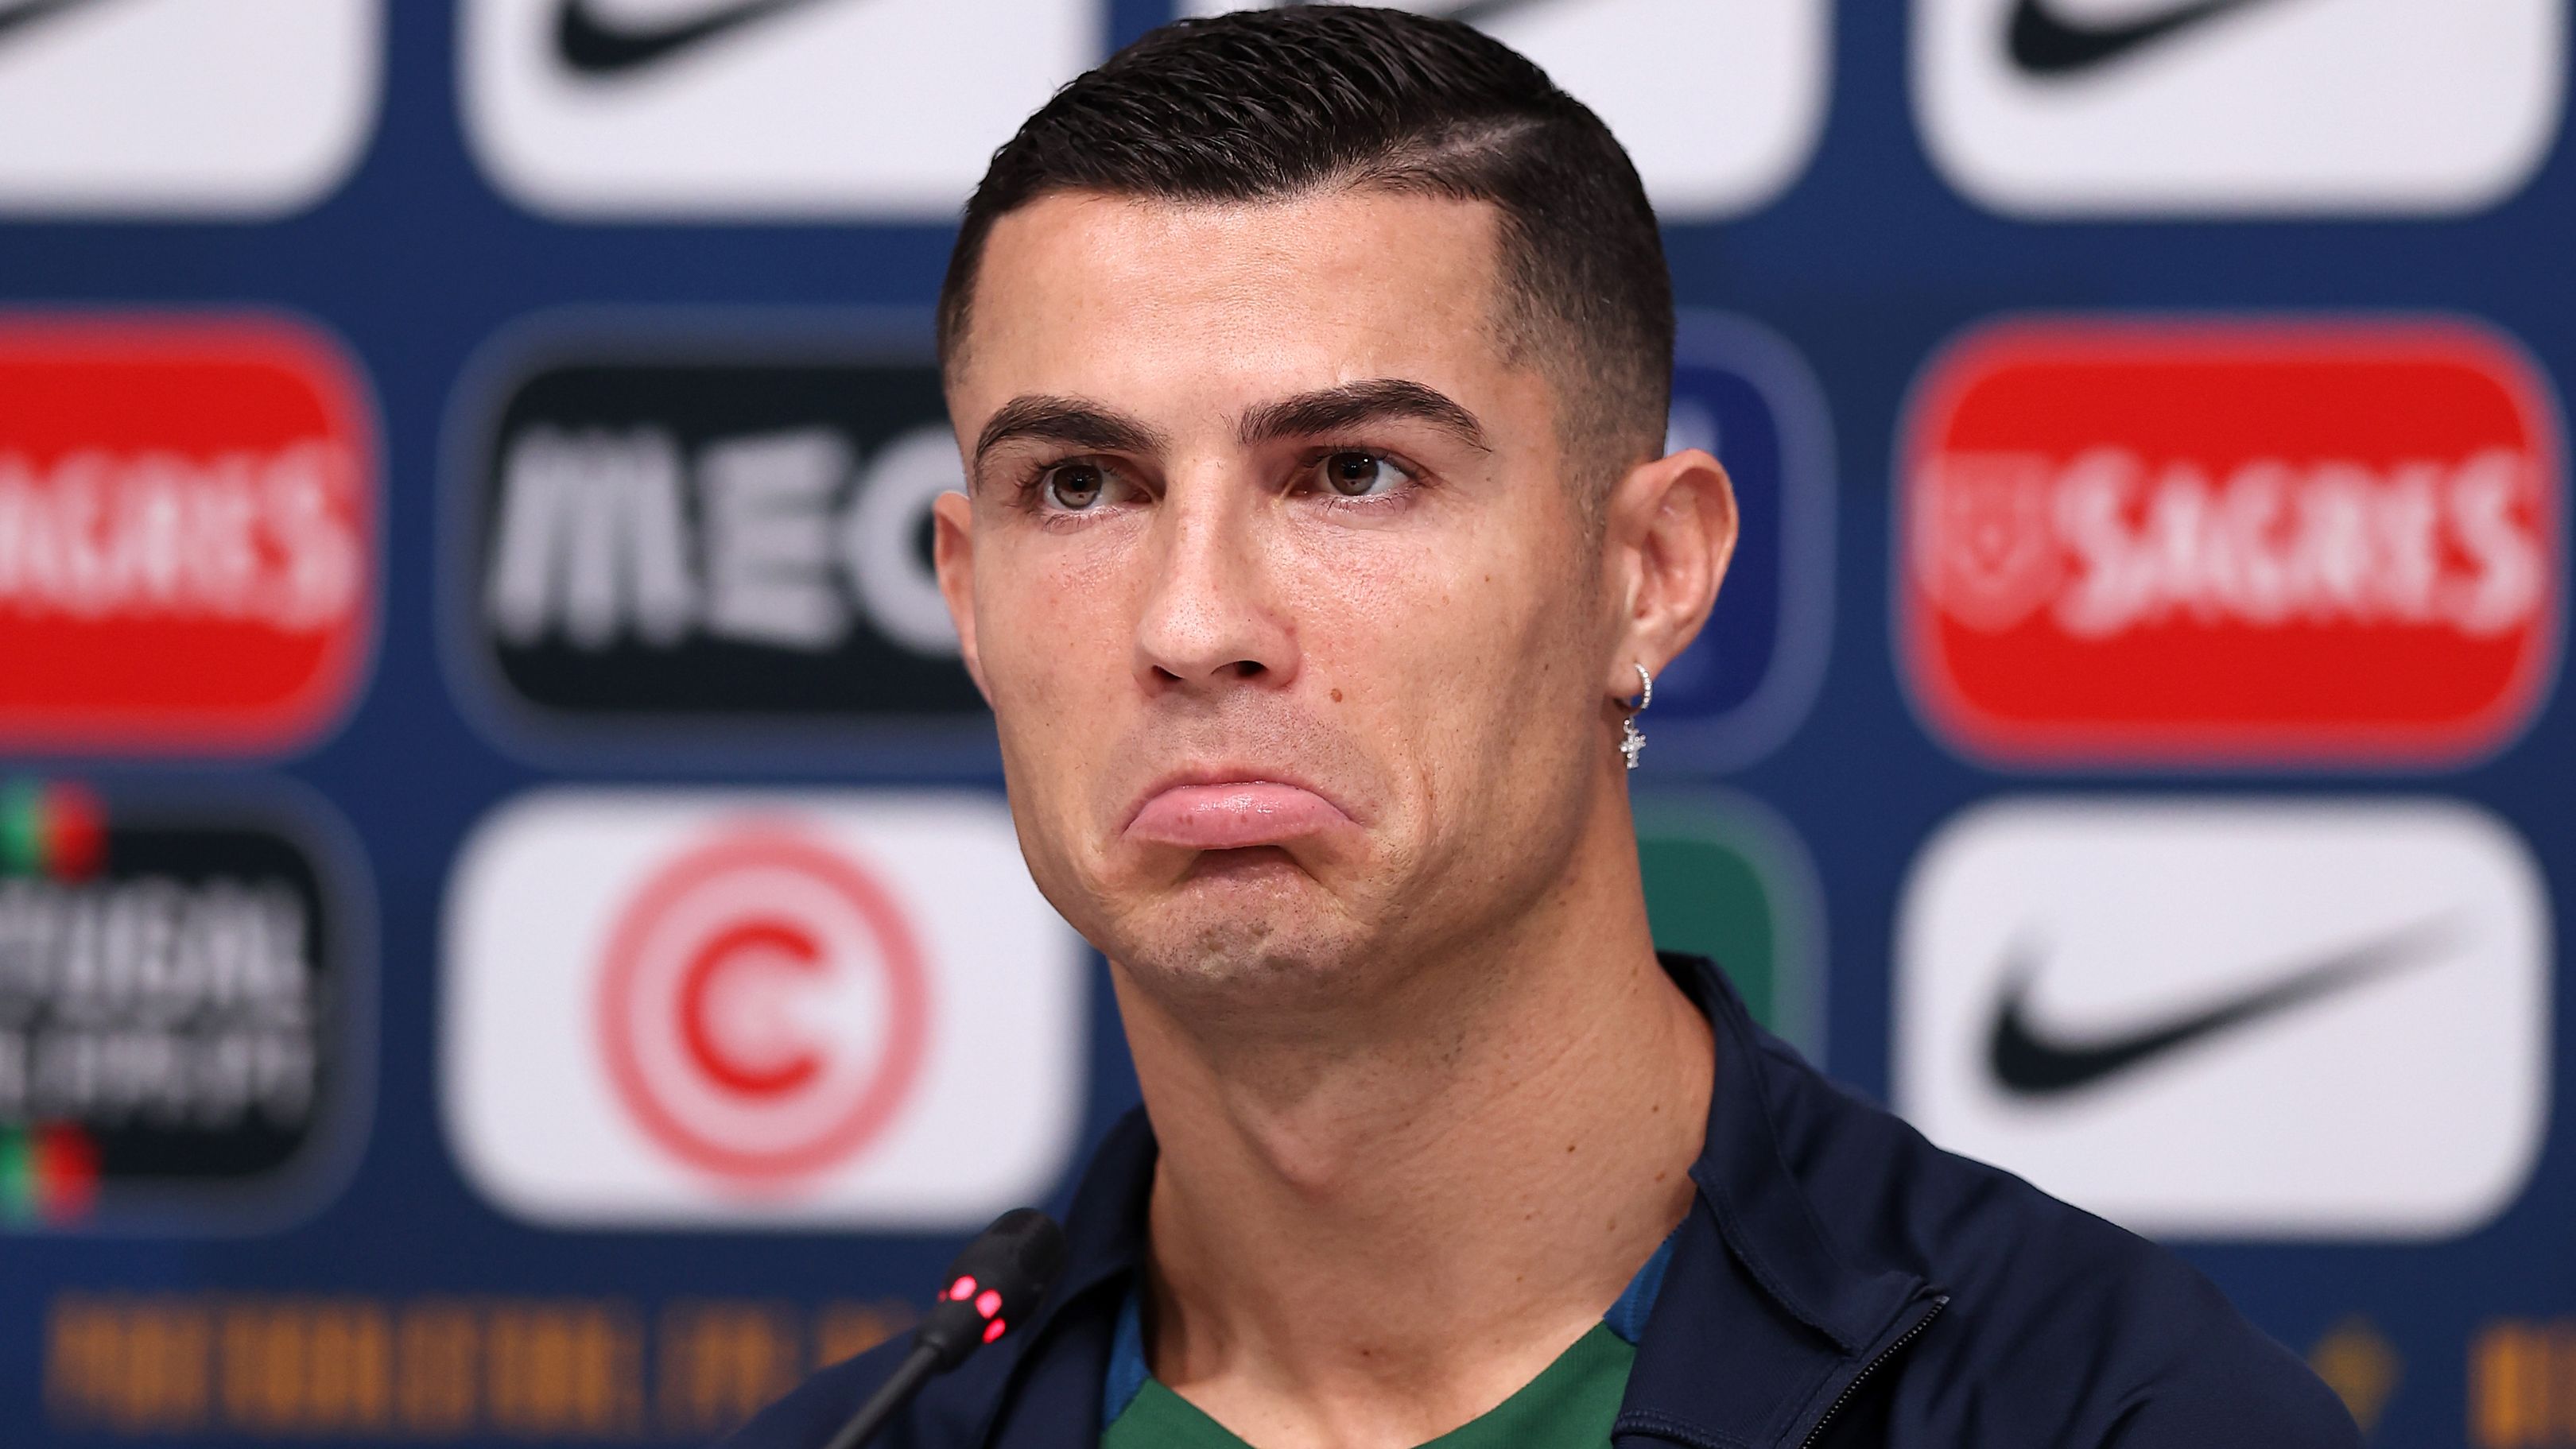 DOHA, QATAR - NOVEMBER 21: Cristiano Ronaldo of Portugal reacts during the Portugal Press Conference on November 21, 2022 in Doha, Qatar. (Photo by Christopher Lee/Getty Images )